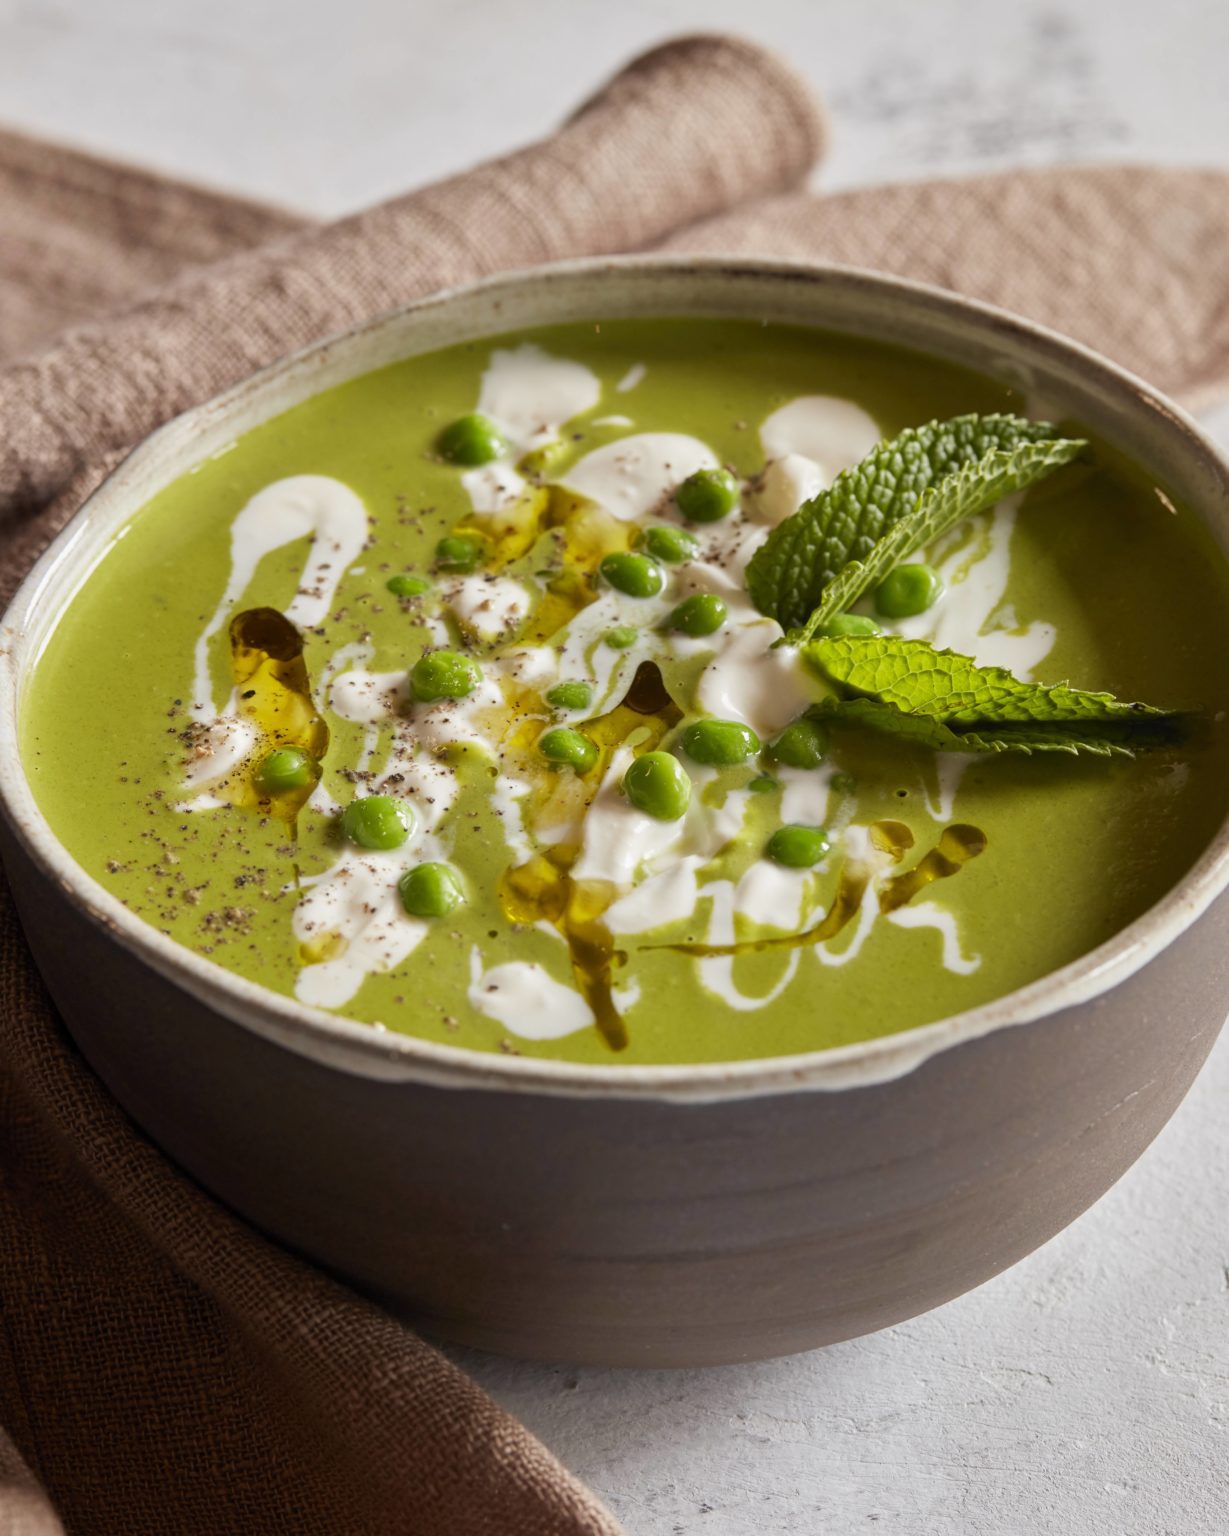 Oven-Roasted Pea Soup with Mint and Mascarpone Dressing - Meatless Monday